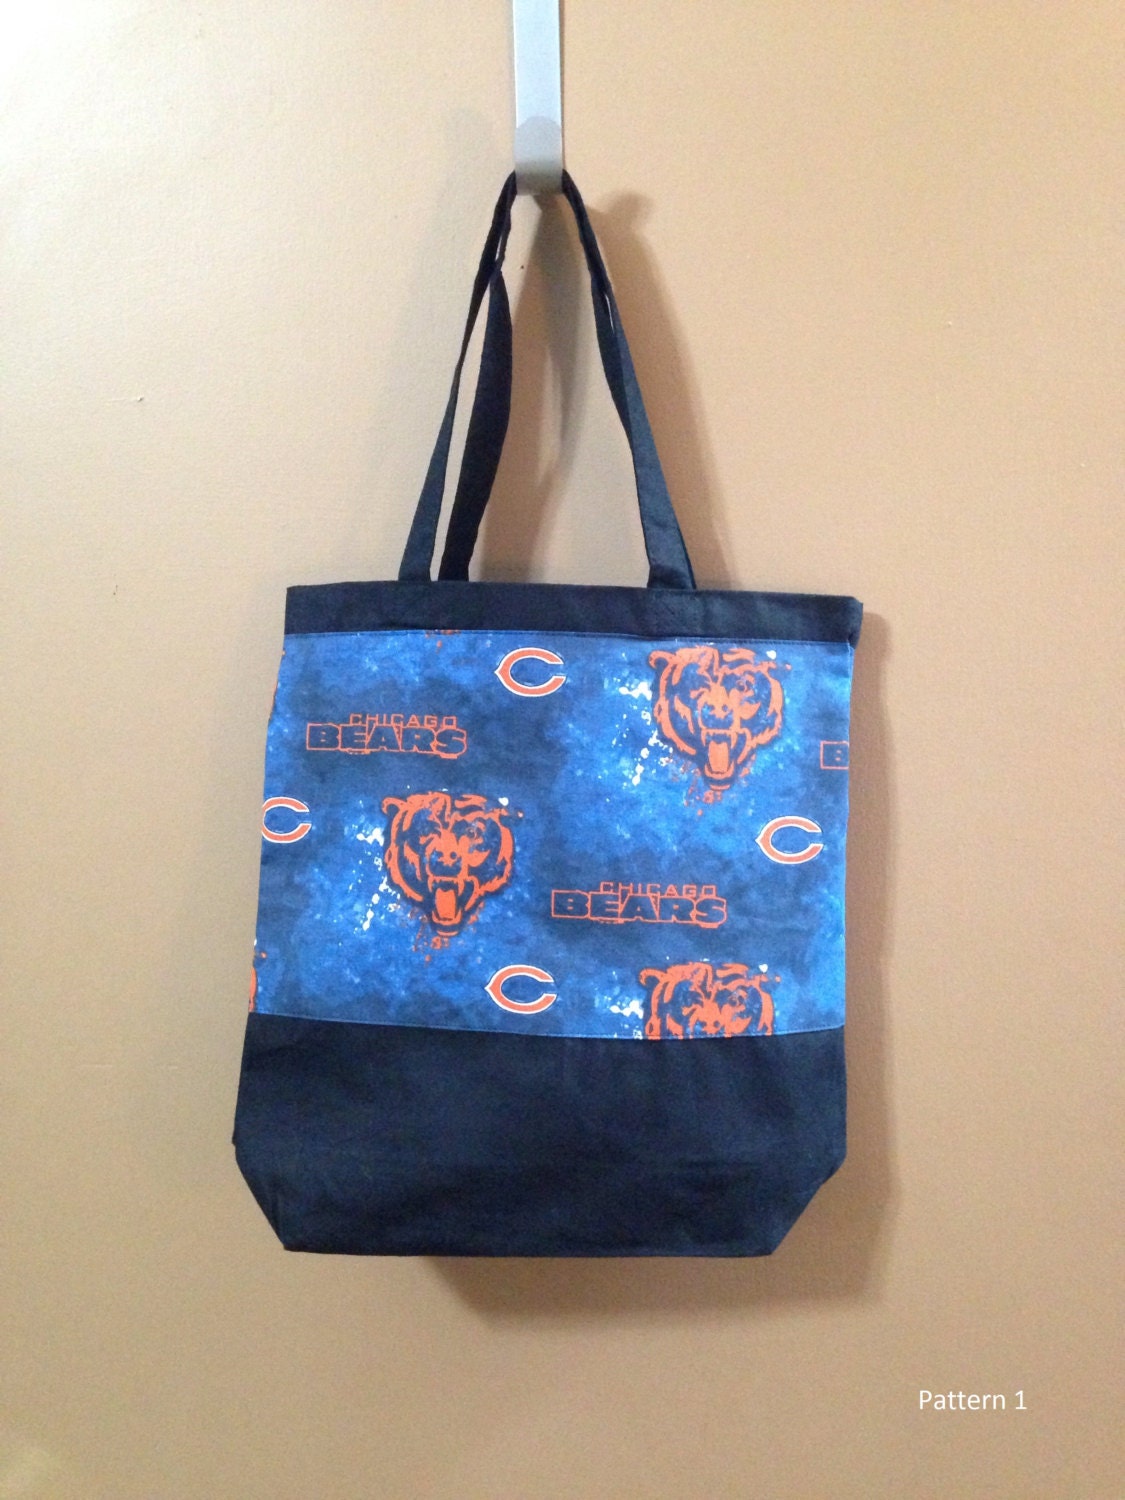 NFL Tote Bags for Kids Tote Bag Sport Tote Bag Childs Tote